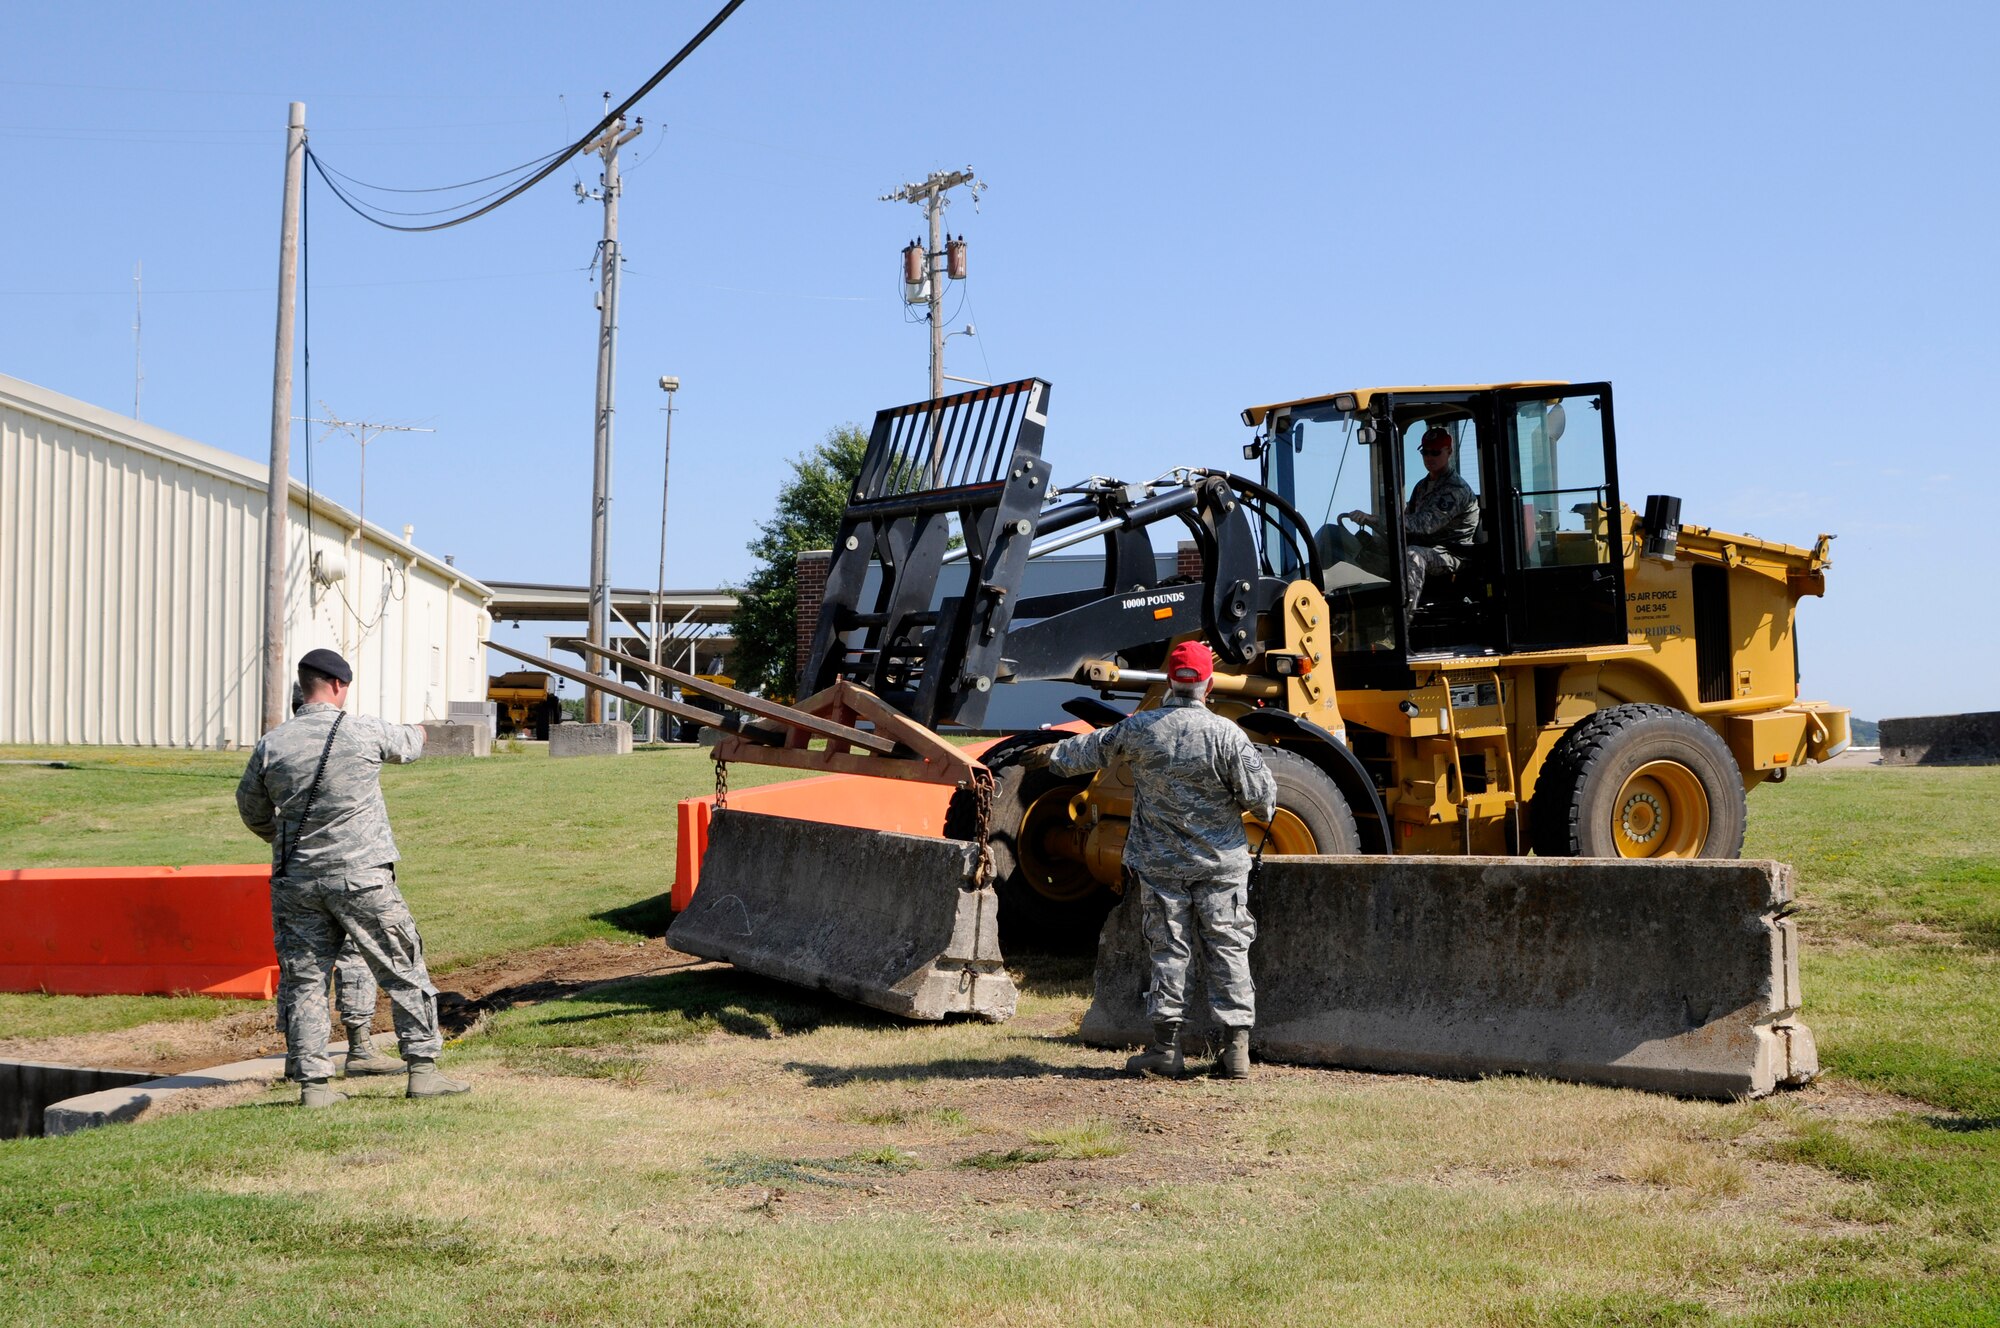 Members of the 188th Antiterrorism office and 188th Civil Engineer Squadron execute a barrier plan during an ability to survive and operate exercise held Sept. 15, 2015, at Ebbing Air National Guard Base, Ark. Ability to survive and operate exercises help strengthen the wing by assessing capabilities and assets of the force. Barriers are placed to keep all mission essential assets protected from an enemy breech. (U.S. Air National Guard photo by Staff Sgt. Hannah Dickerson/Released)